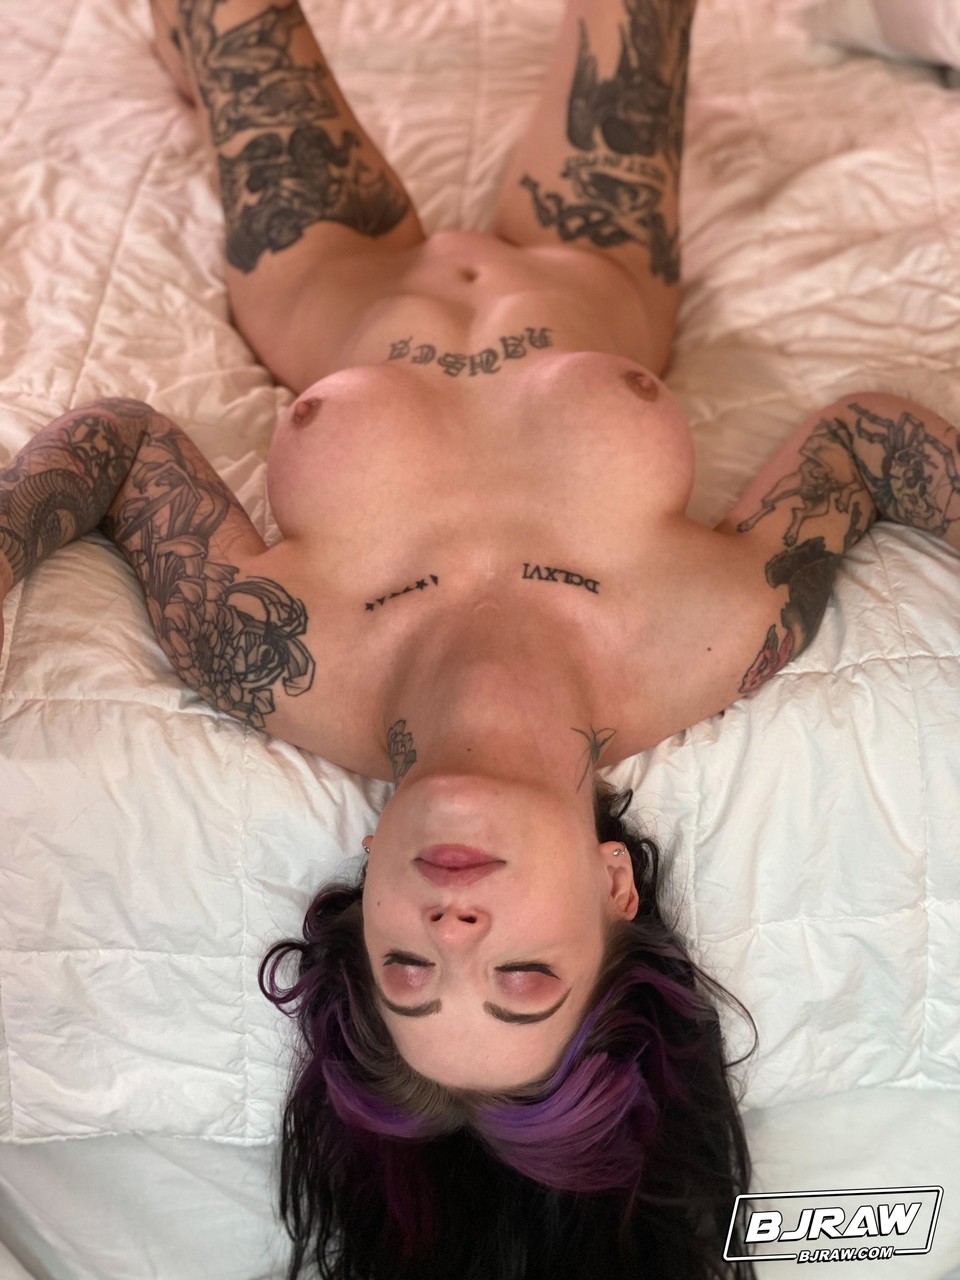 Brunette babe with tattoos Charlotte Sartre takes a dick in her mouth foto pornográfica #424649935 | BJ Raw Pics, Charlotte Sartre, Tattoo, pornografia móvel